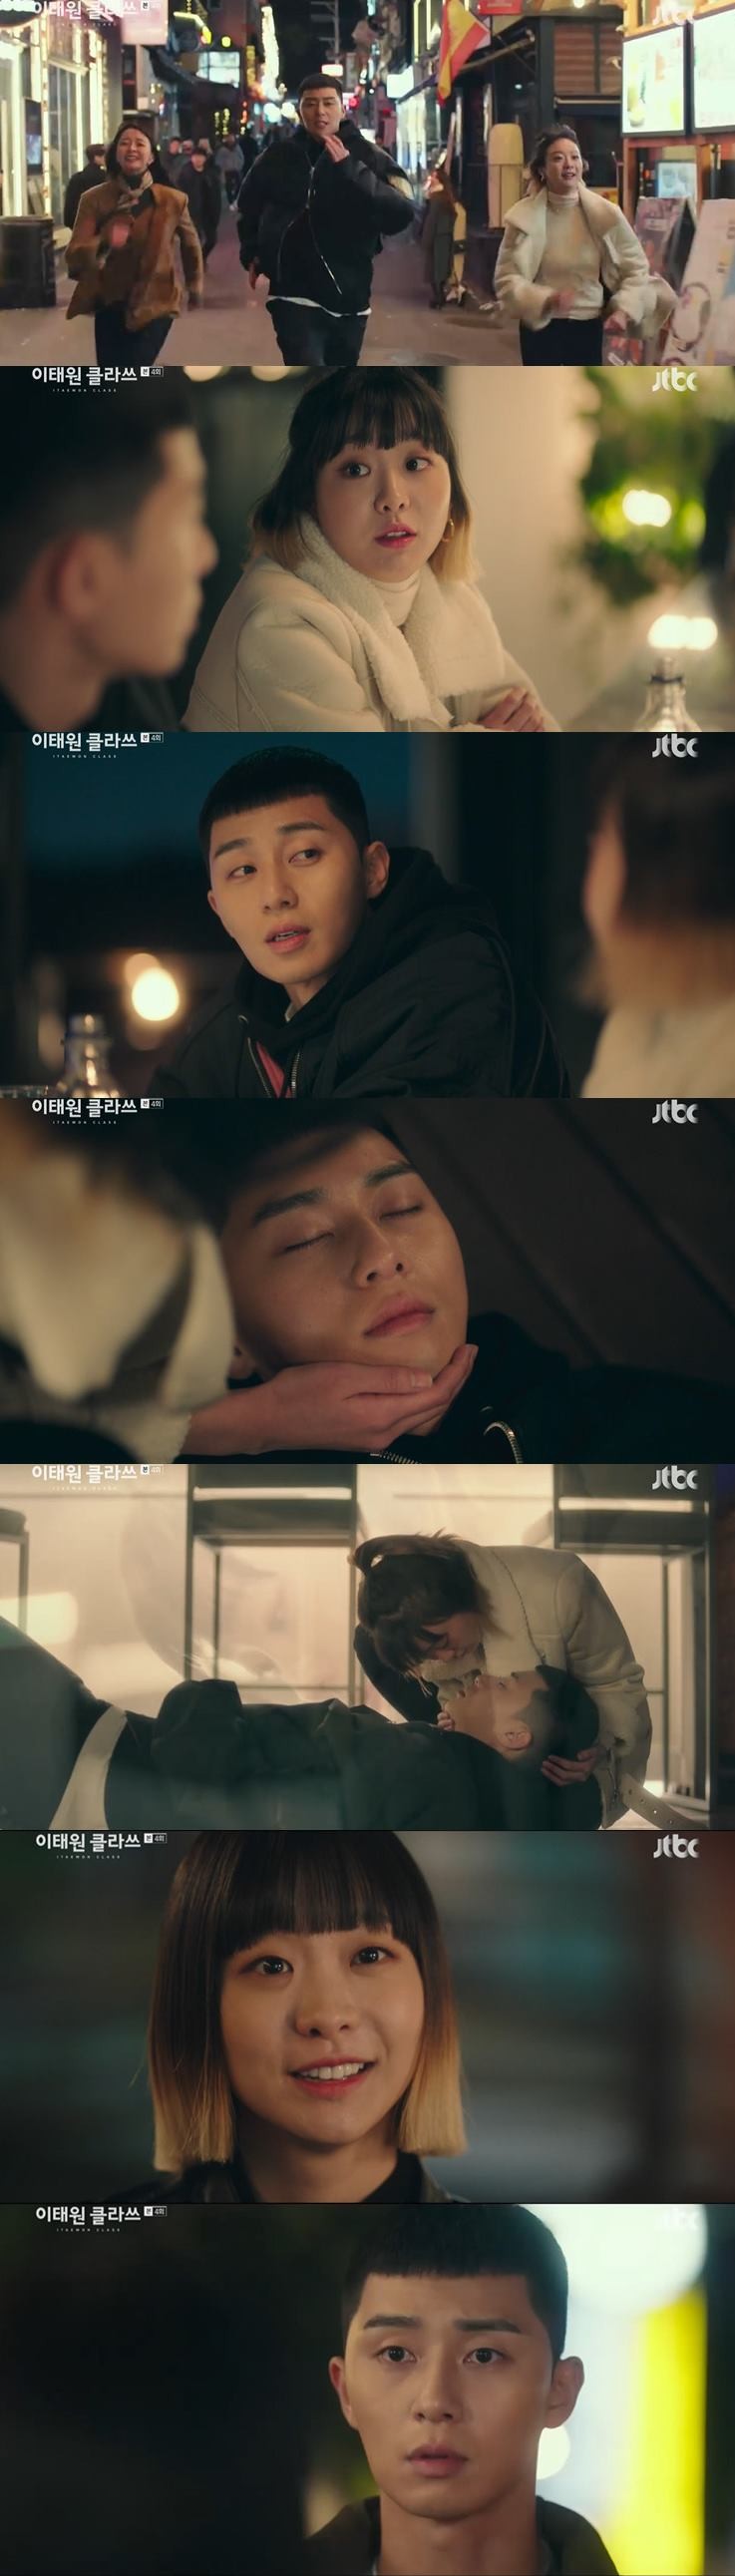 Itaewon Klath Kim Da-mi realised his heart about Park Seo-joon, kissed - and got a job at night.On JTBCs Itaewon Klath broadcast on the 8th, Joy Seo (Kim Da-mi Boone) was portrayed as realizing his love for Park Sae-ro-yi (Park Seo-joon).With Park Sae-ro-yis store Sanbam suspended for two months, Joycer turned 20 as it became January 1.While celebrating drinking with friends, Joycer recalled Park Sae-ro-yi, who had been thinking about Park Sae-ro-yi.At that time, Park Sae-ro-yi tilted a drink with Oh Soo-ah (Kwon Na-ra); Park Sae-ro-yi revealed that he still likes Oh Soo-ah.Then Ive never even had Confessions, Oh Soo-ah said.Park Sae-ro-yi, who was determined to become rich, the ideal type of Oh Soo-ah.If my job goes well, youre a white-collar, and then you go and Confessions and itll be fun, he said.So when Oh Soo-ah was surprised, Park Sae-ro-yi said, Its empty.Oh Soo-ah said, There is nothing I can do to be a white man, but I am cheering.Then, feeling the presence of Joy, he left the bar, and Huntingnam followed him persistently, and when Joyser continued to drop, Huntingnam beat his cheek with anger.Joy took down Huntingnam and punished him.And as he ran away, Joy went to the public toilet, and accidentally met Park Sae-ro-yi.Joy saw Park Sae-ro-yi, who wanted to meet so much, and he could not take his eyes off him; Park Sae-ro-yi saw the red cheeks of Joy and noticed that there was a problem.Park Sae-ro-yi snatched Joysers wrist and came out; outside, the situation where Oh Soo-ah was waiting.Park Sae-ro-yi told Oh Soo-ah to run; so suddenly Park Sae-ro-yi, Oh Soo-ah and Joyser raced in Itaewon.Joy made Park Sae-ro-yi go to the cafe, saying he would pass on promotional tips, and the three went to the cafe.While Park Sae-ro-yi went to get the drink, Oh Soo-ah asked Joyser, The new Roy likes me, its been 10 years?Theres an interest, Joycer replied, as the truth goes.Oh Soo-ah cautioned, Youre not the kind of kid youre going to handle, and Joyser revealed that he knew Park Sae-ro-yi was an attempted murder.Oh Soo-ah then brought up the story of the single night shutdown, which led to Joysers notice that it was Oh Soo-ah who reported himself as a minor.Joyser was sarcastic and frightened of Oh Soo-ahs actions as if he knew a secret; but Oh Soo-ah also said, Youre hopeless anyway.Then Park Sae-ro-yi came, and Oh Soo-ah asked, Is that me still good?, Confessions, Who called your store police, thats me?Park Sae-ro-yi replied, Yes. There must have been a reason. I dont know if you dont tell me. Im just a little sorry.Oh Soo-ah left first, shocked by Park Sae-ro-yis answer.Later, Park Sae-ro-yi and Joyser drank together; Joyser noted that the sweet nights are not basic, and that the store name does not match Itaewon.Park Sae-ro-yi said, My life is a little bit bitter. I wanted my life to be a little sweet.And tired Park Sae-ro-yi fell to his torment.Looking at such Park Sae-ro-yi, Joy said, I want to make this persons life sweet, he said. This impulse is not suppressed.Joy, who gradually approached Park Sae-ro-yi, realized his mind I like it and kissed him.And the next day, the decision-making Joyser went to the moon, when he saw Park Sae-ro-yi and thought, I realize as soon as I see it, I didnt have to worry.When Park Sae-ro-yi asked why he came, Joyce replied, I want to be with you. And Joyce said, Ill work here.I will make my dream come true, boss, he said with a bright smile.Joy has vowed to make Park Sae-ro-yi a huge man, saying that he can make love and success in his mind.